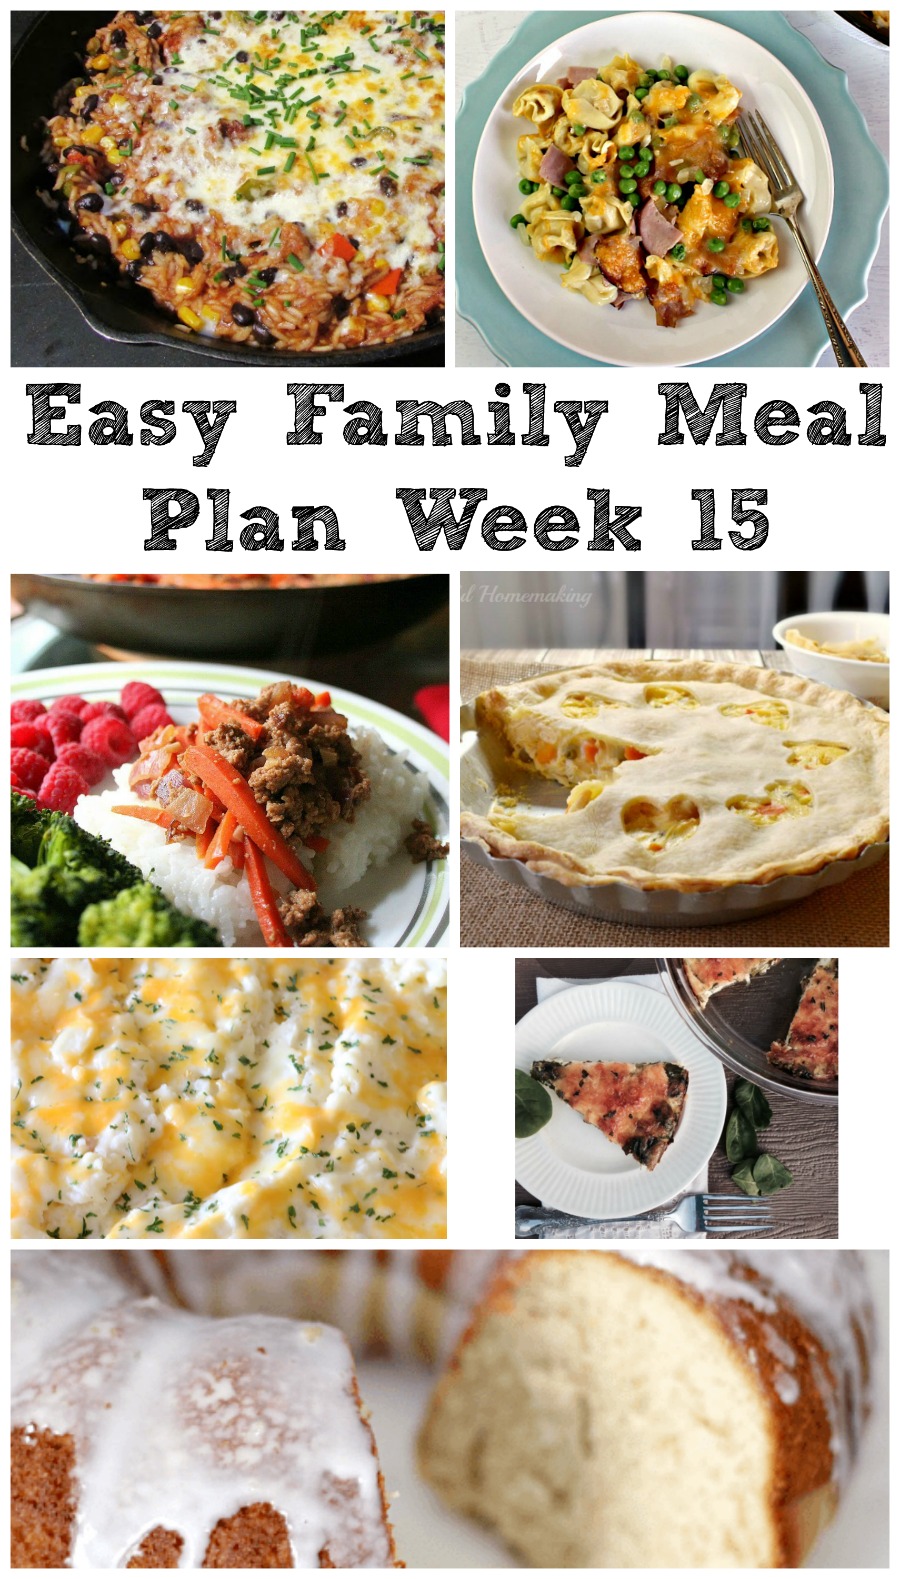 Cooking With Carlee: Easy Family Meal Plan Week 15